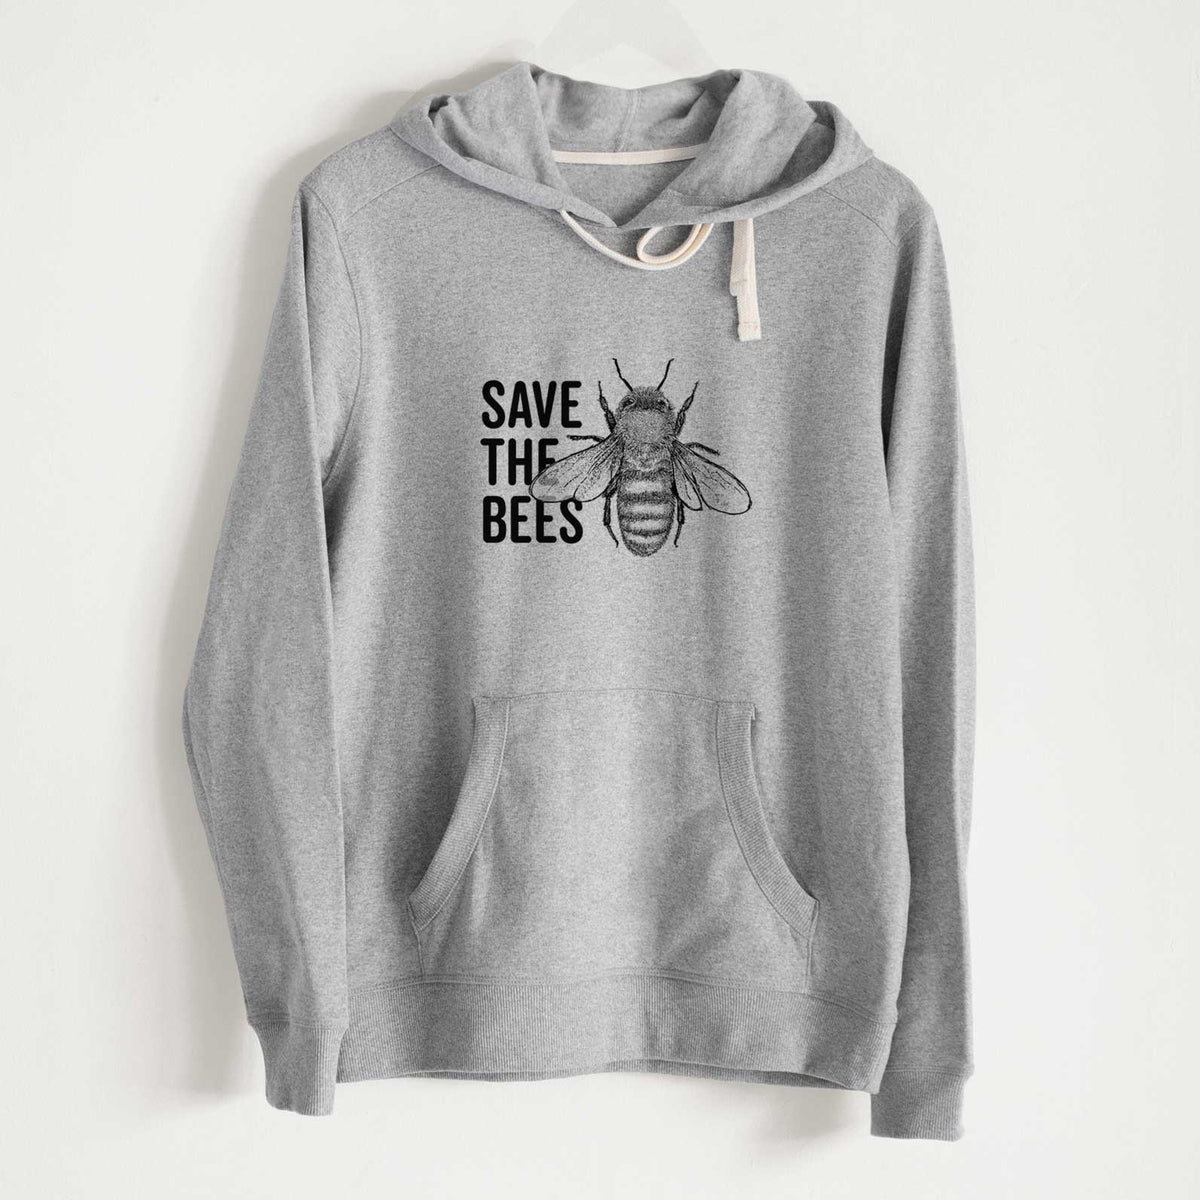 Save the Bees - Unisex Recycled Hoodie - CLOSEOUT - FINAL SALE